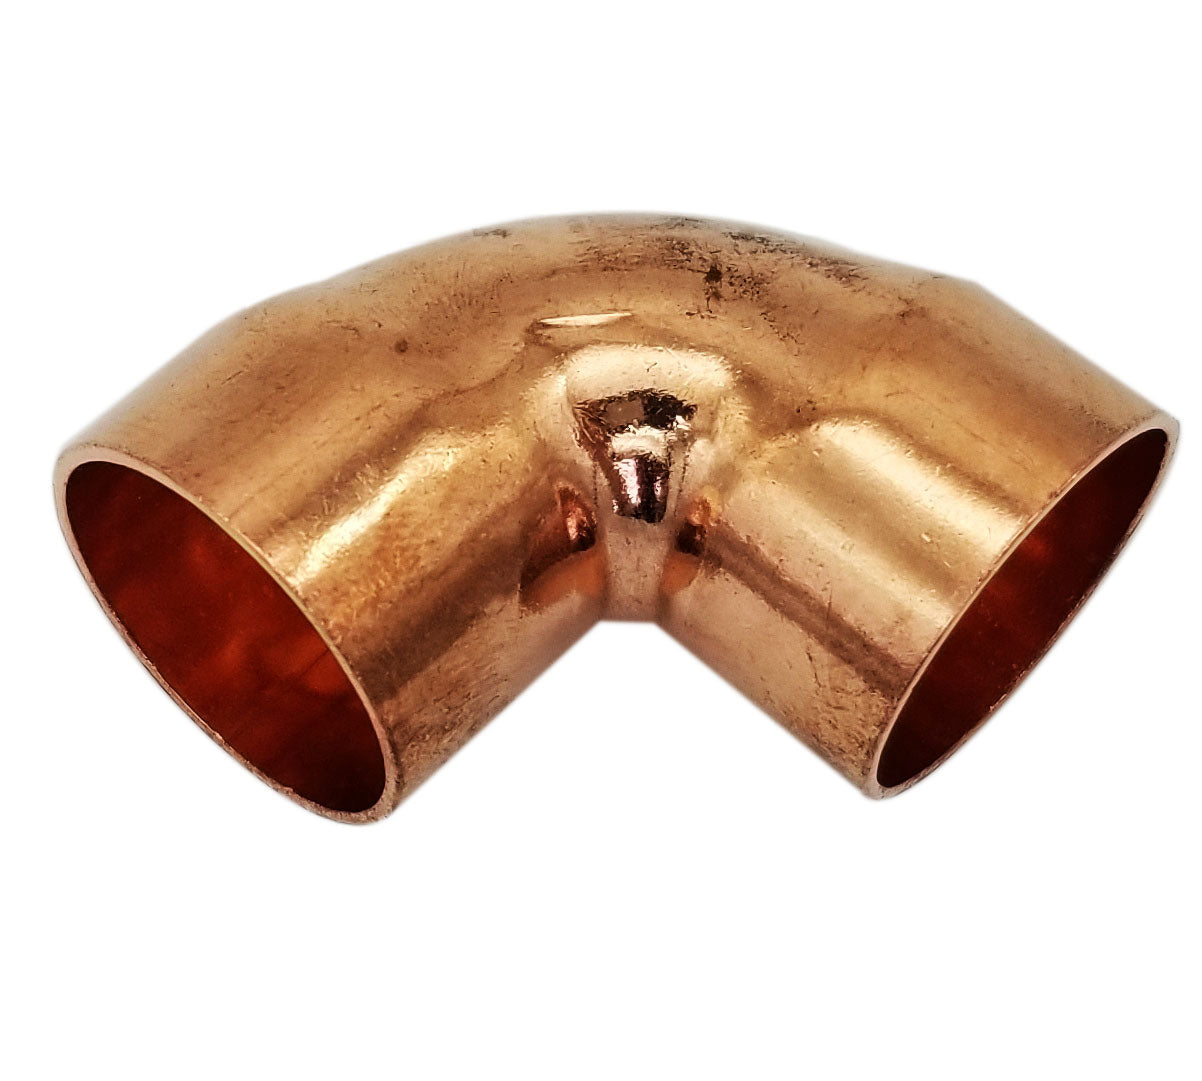 Copper Fitting 7/8 Inch (HVAC Outer Dimension) 3/4 Inch (Plumbing Inner Dimension) - 45 Degree Copper Pressure Elbow & HVAC – 99.9% Pure Copper - 5 Pack